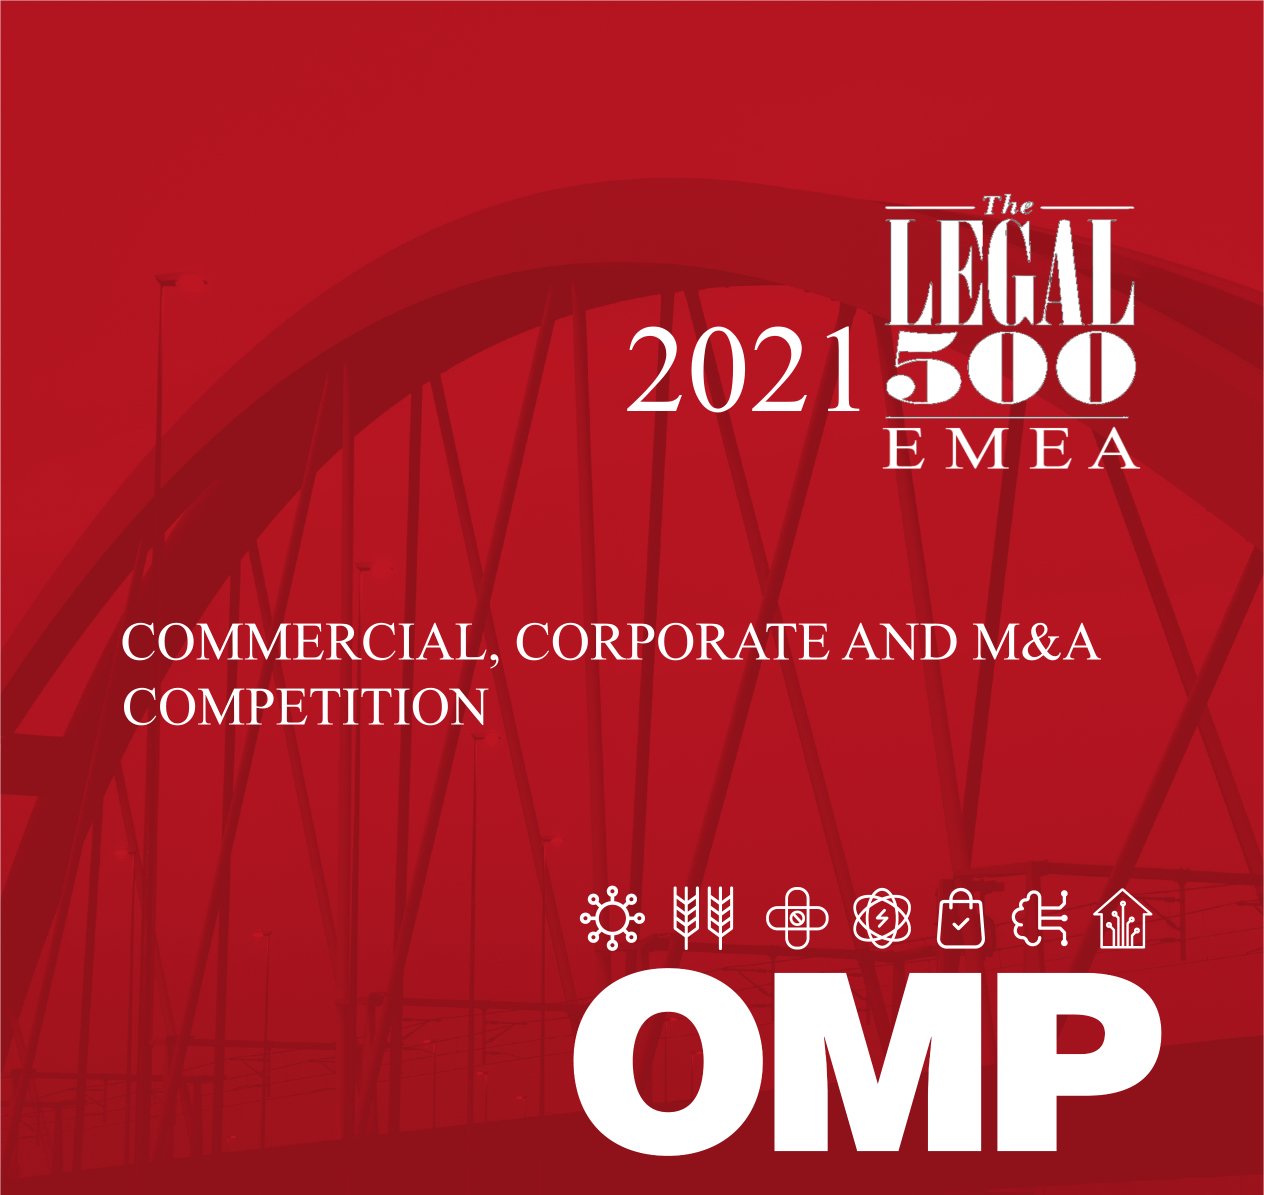 The Legal 500 – EMEA 2021 recommends Law Offices of OMP as one of the leading law firm in Ukraine